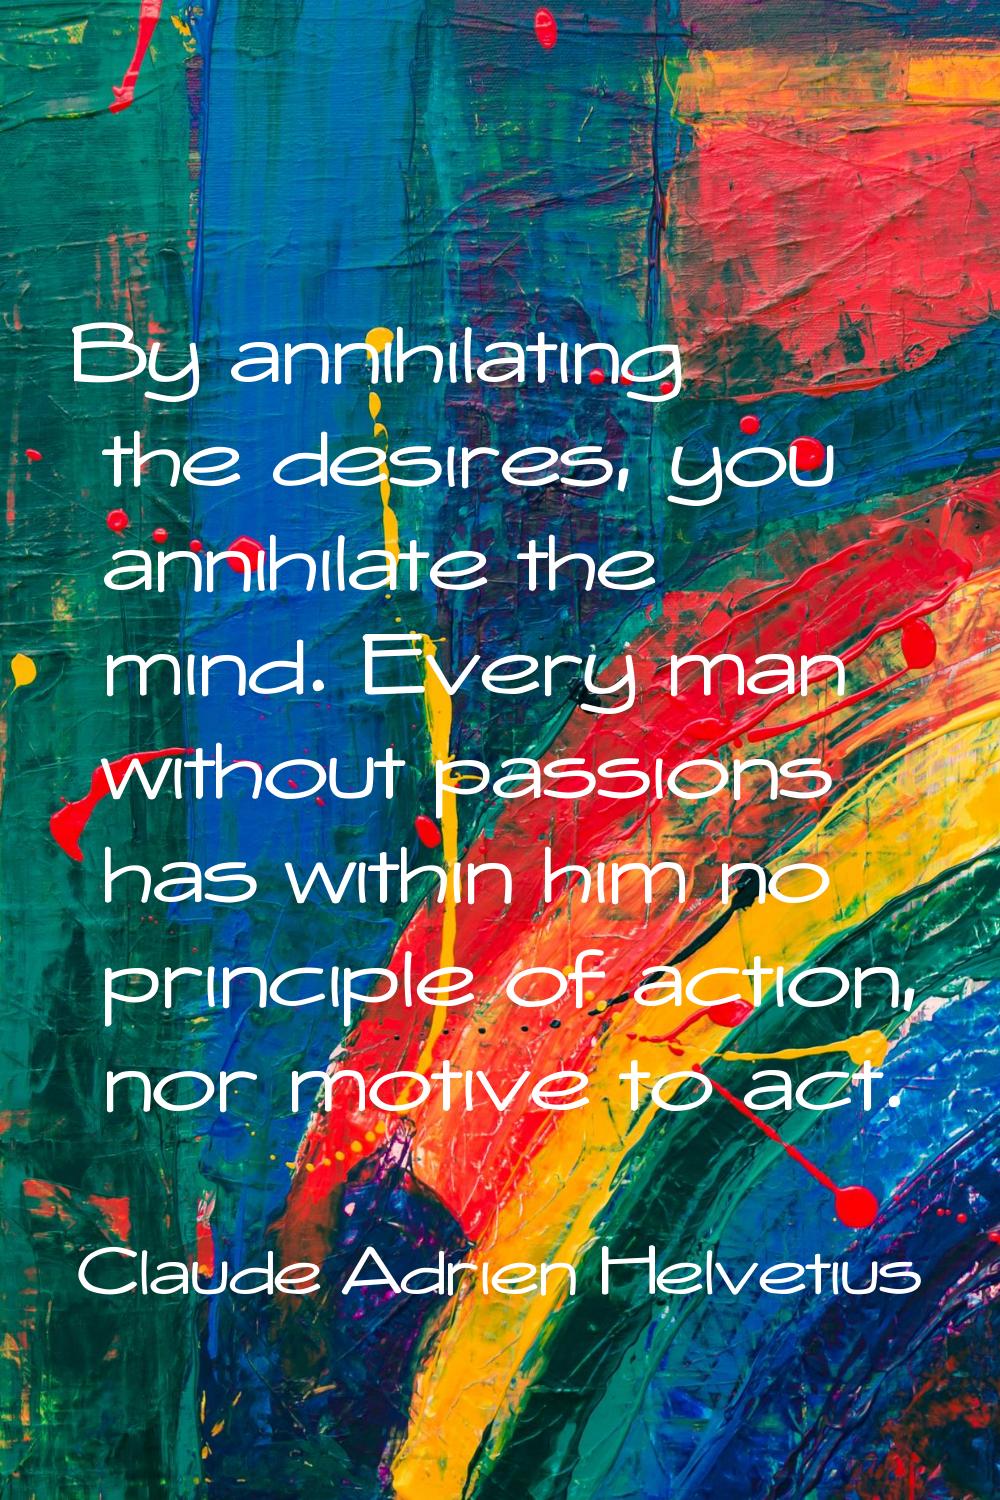 By annihilating the desires, you annihilate the mind. Every man without passions has within him no 